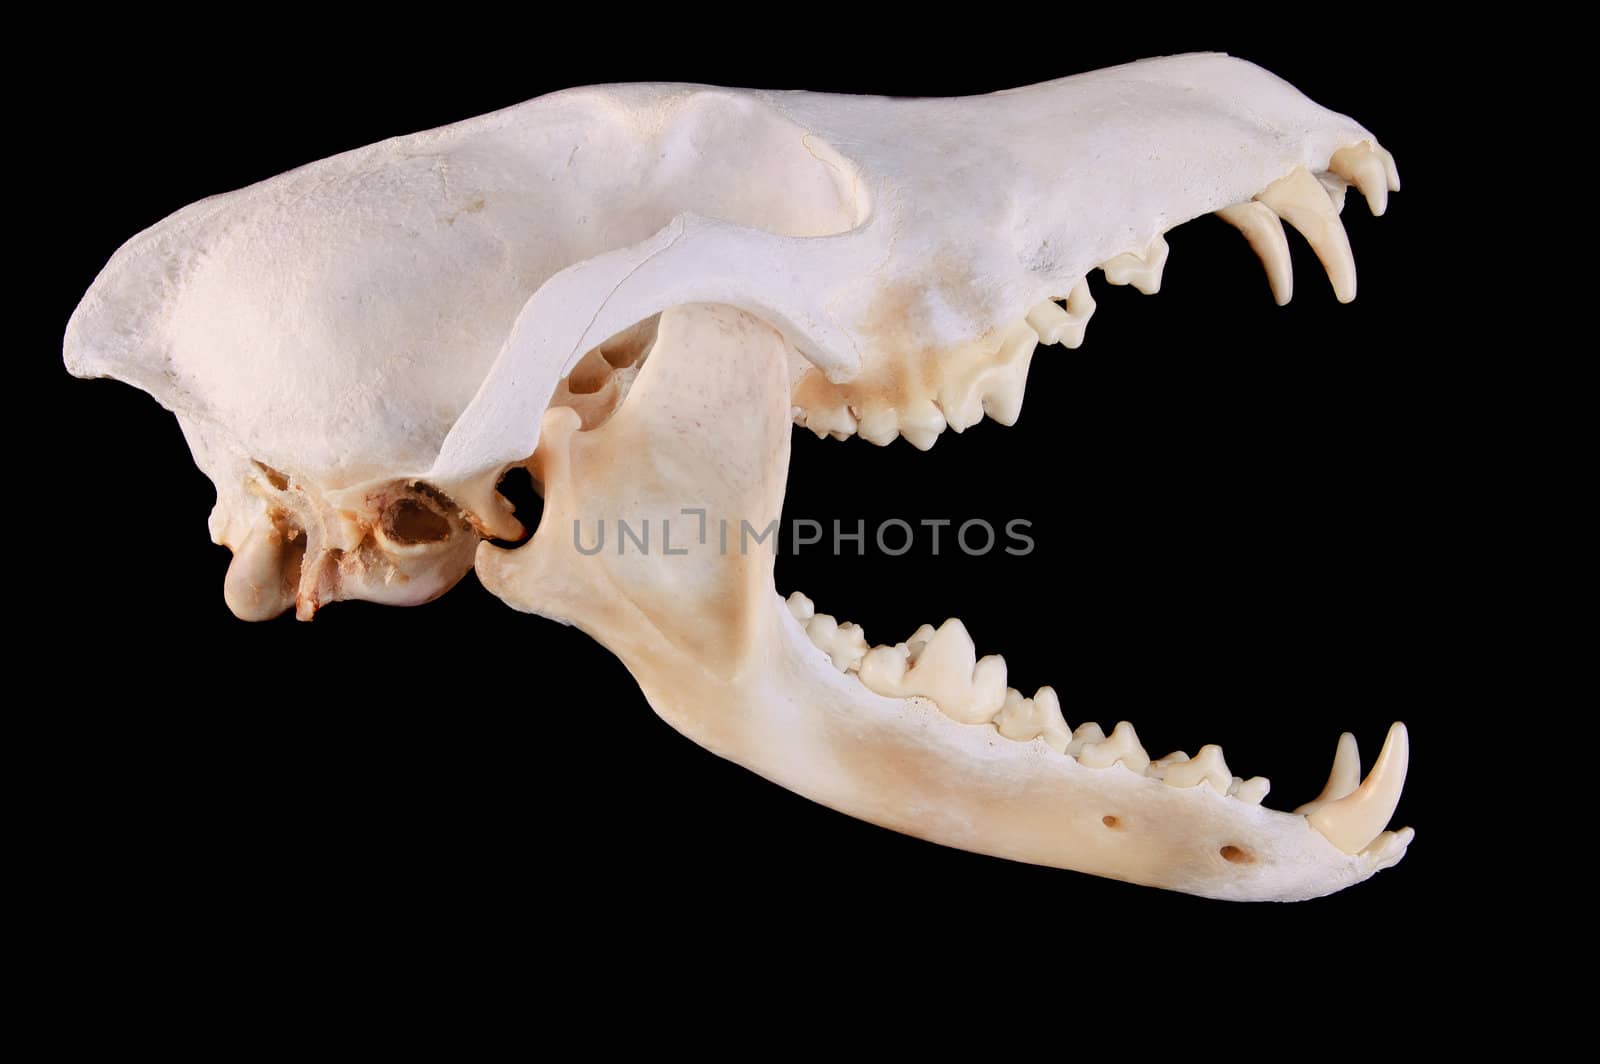 Skull of a coyote (canis Latrans) on a black background by jeffbanke